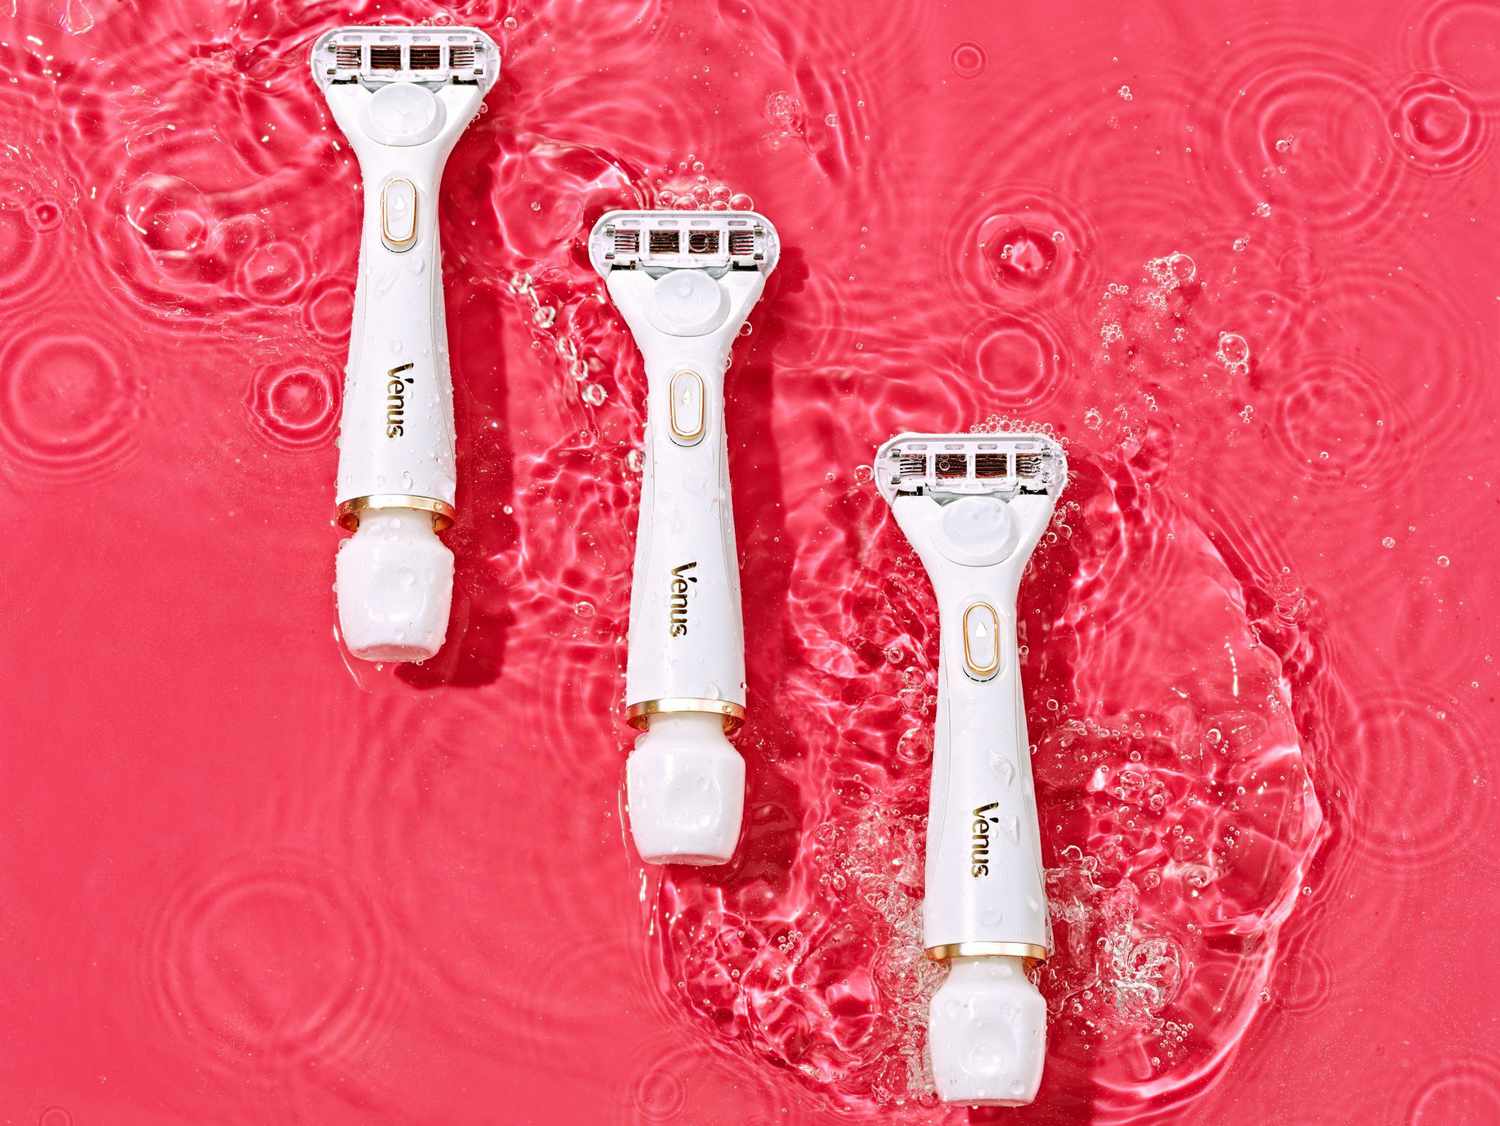 Venus Radiant Skin Razors: best beauty products for May 2021